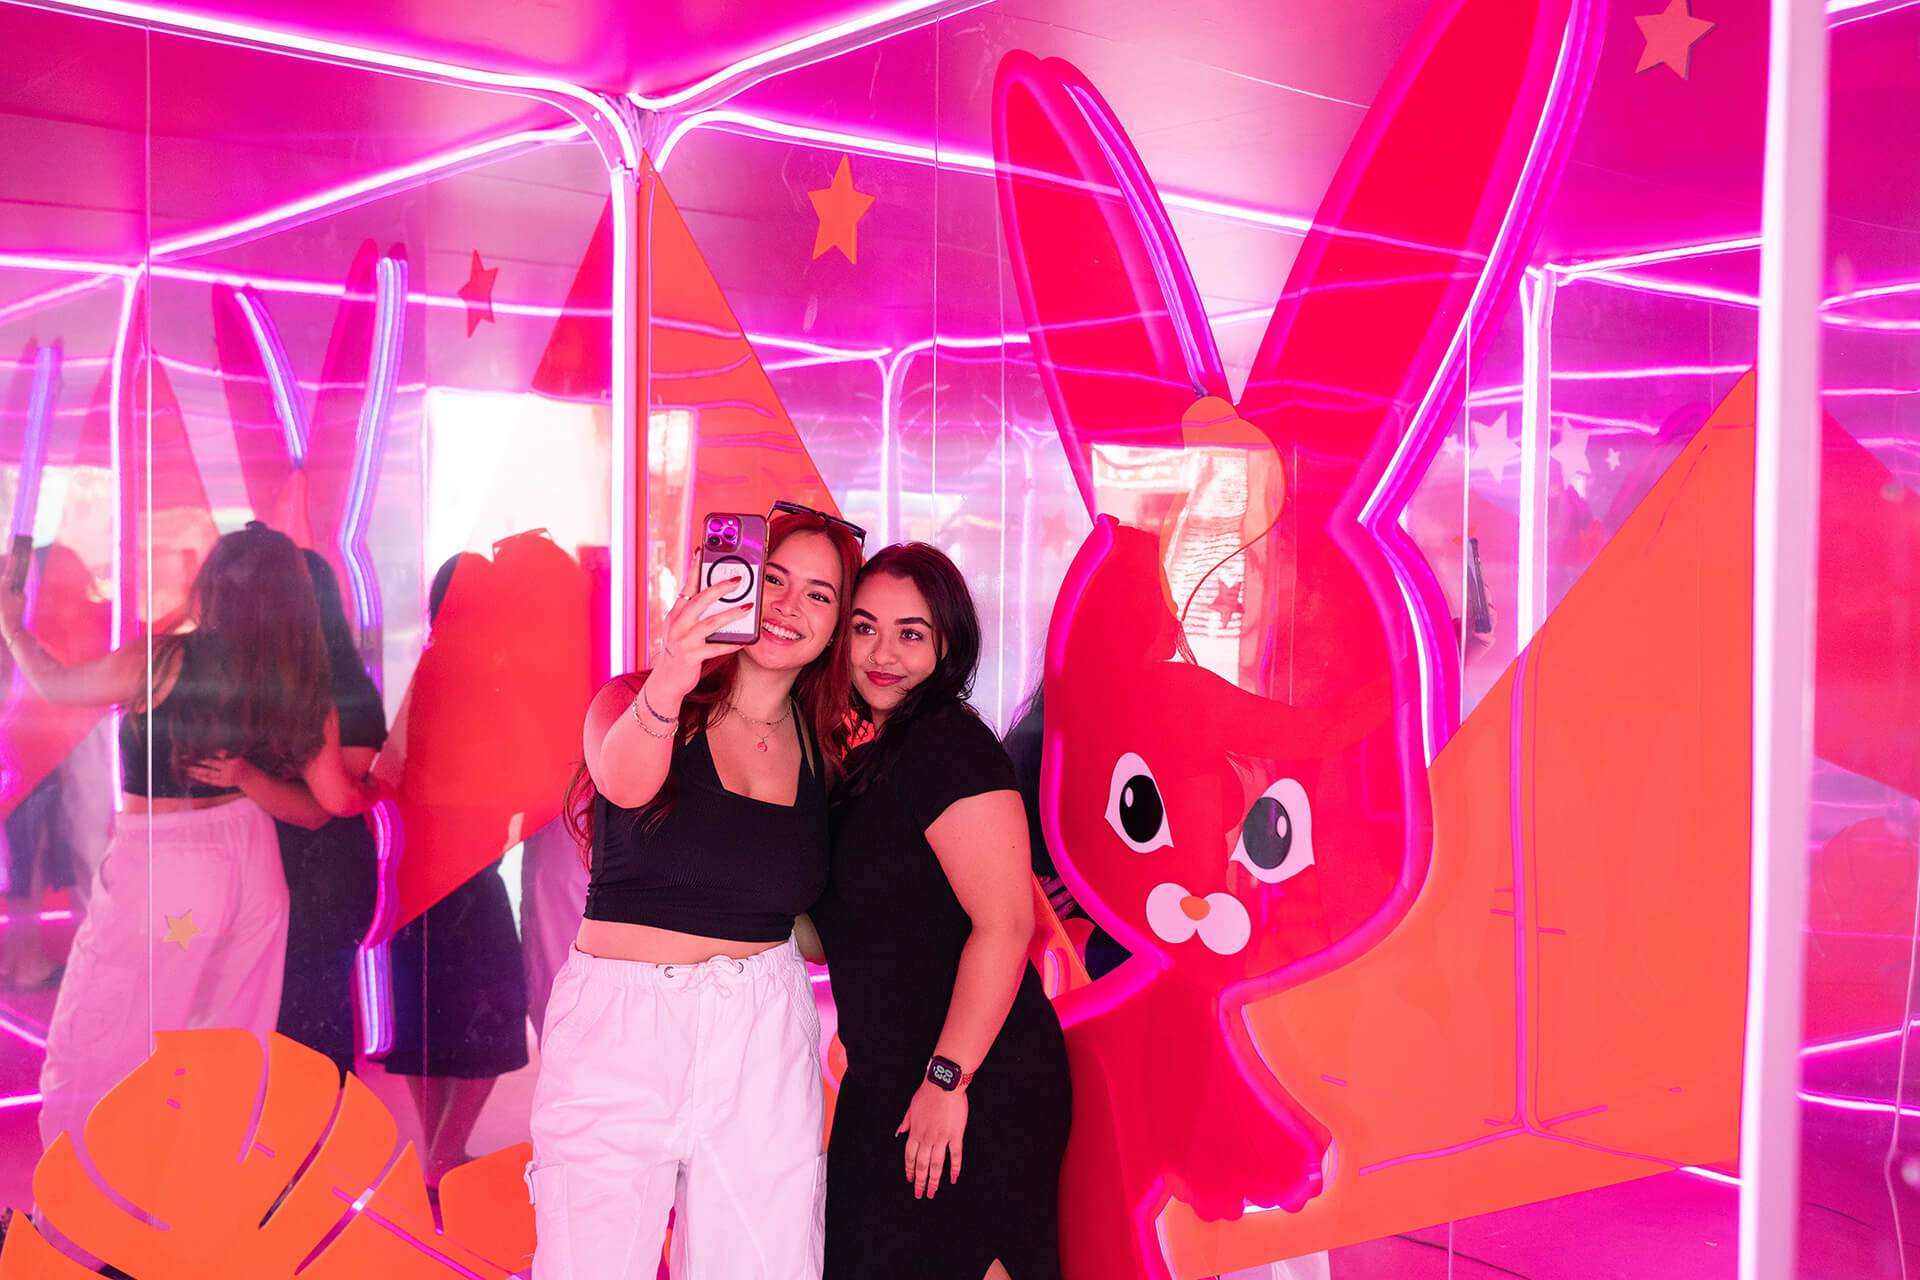 2 women taking a selfie inside the Lucky Lunar experiential brand activation installation at World Square Sydney for Lunar New Year